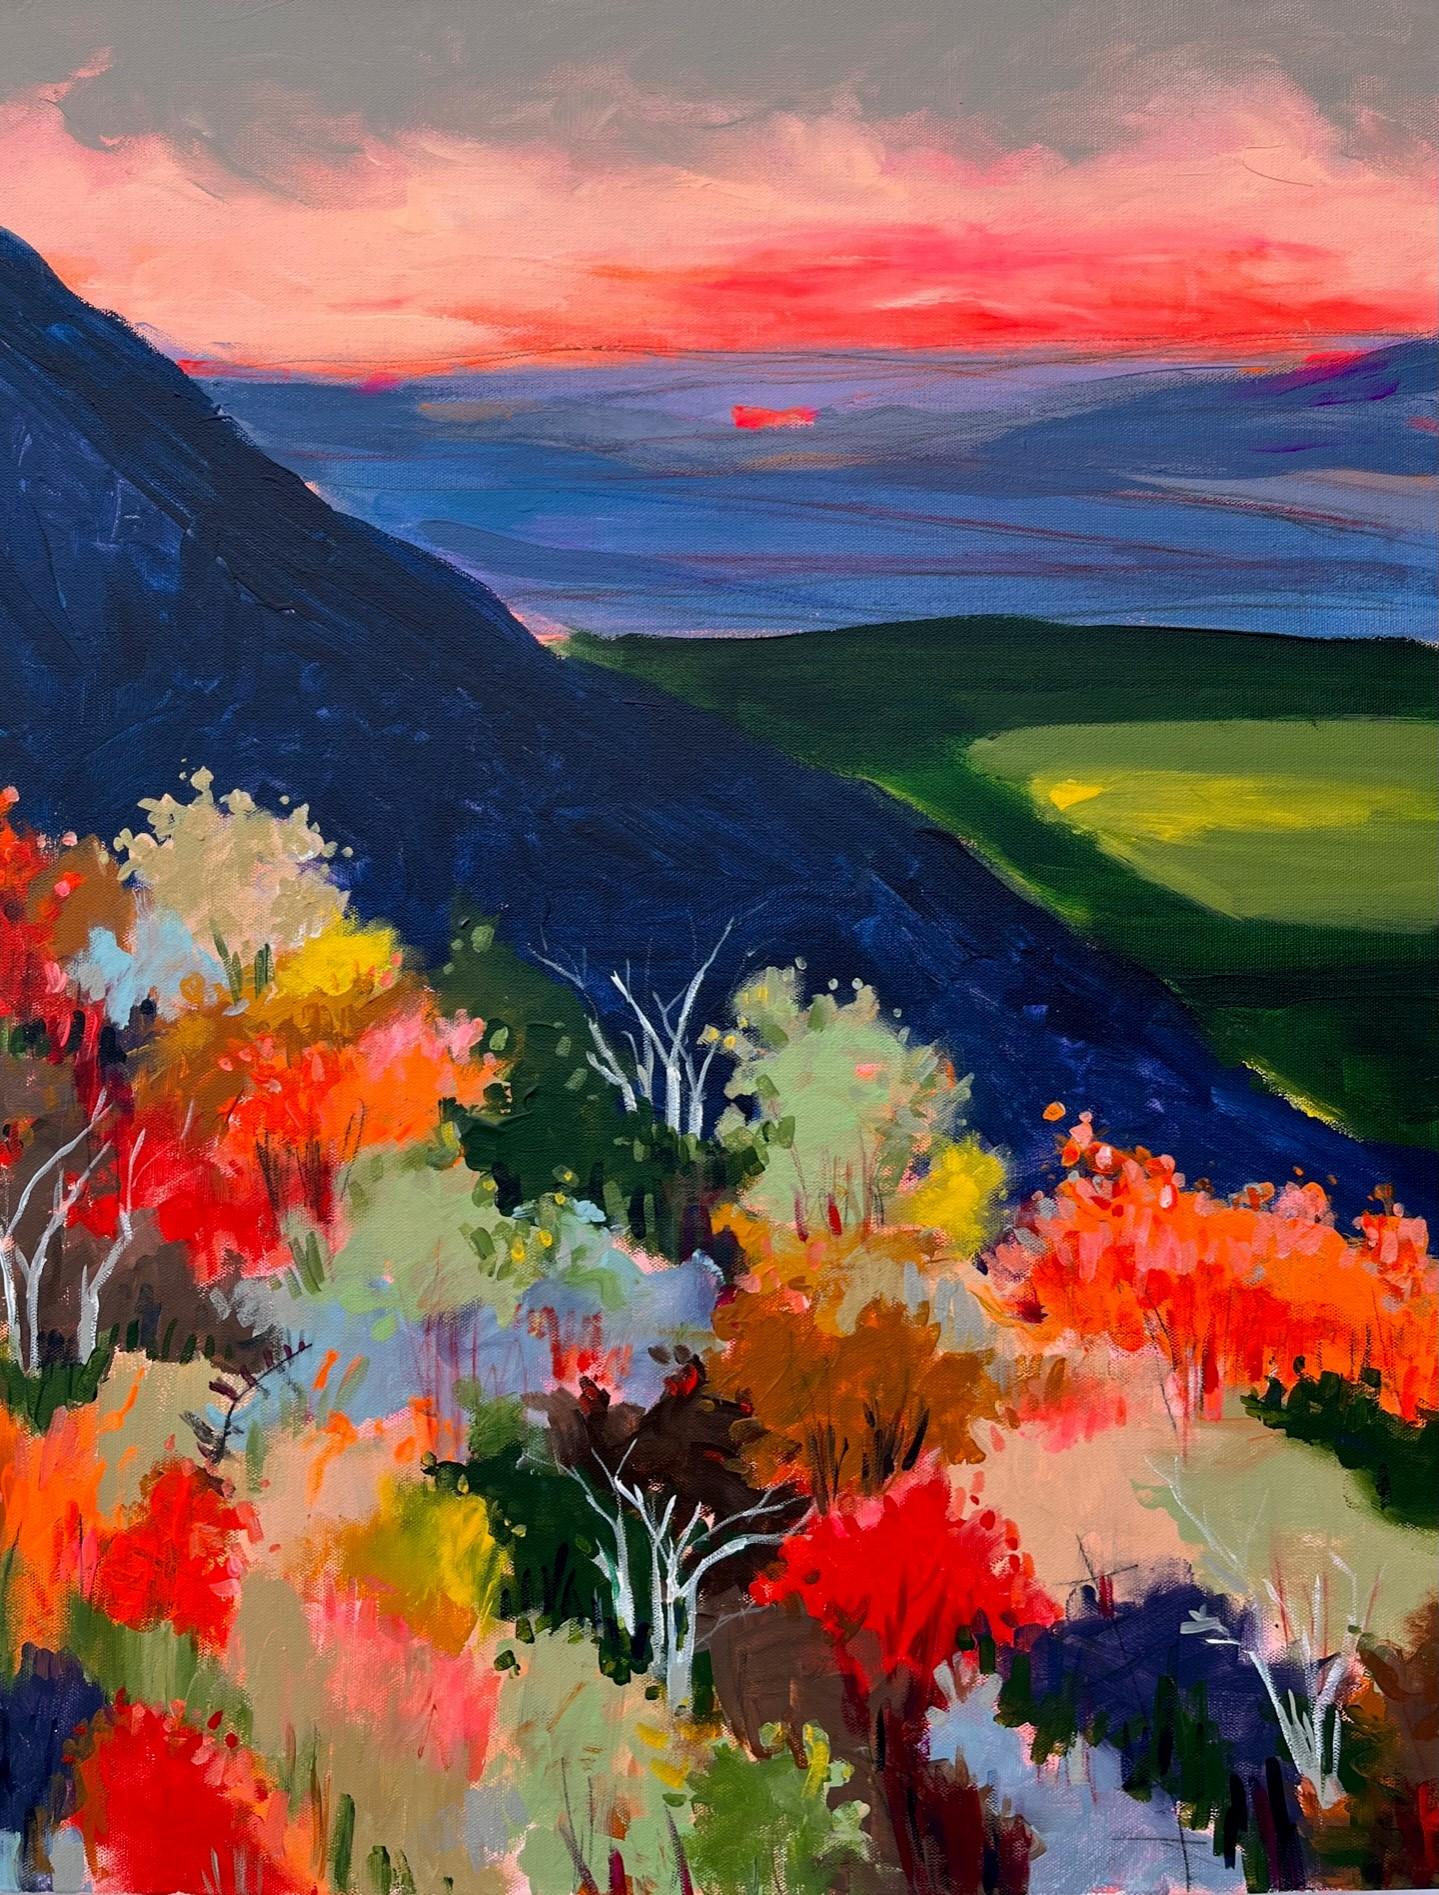 Dawn Over the Foliage, Original Painting - Art by Rebecca Klementovich